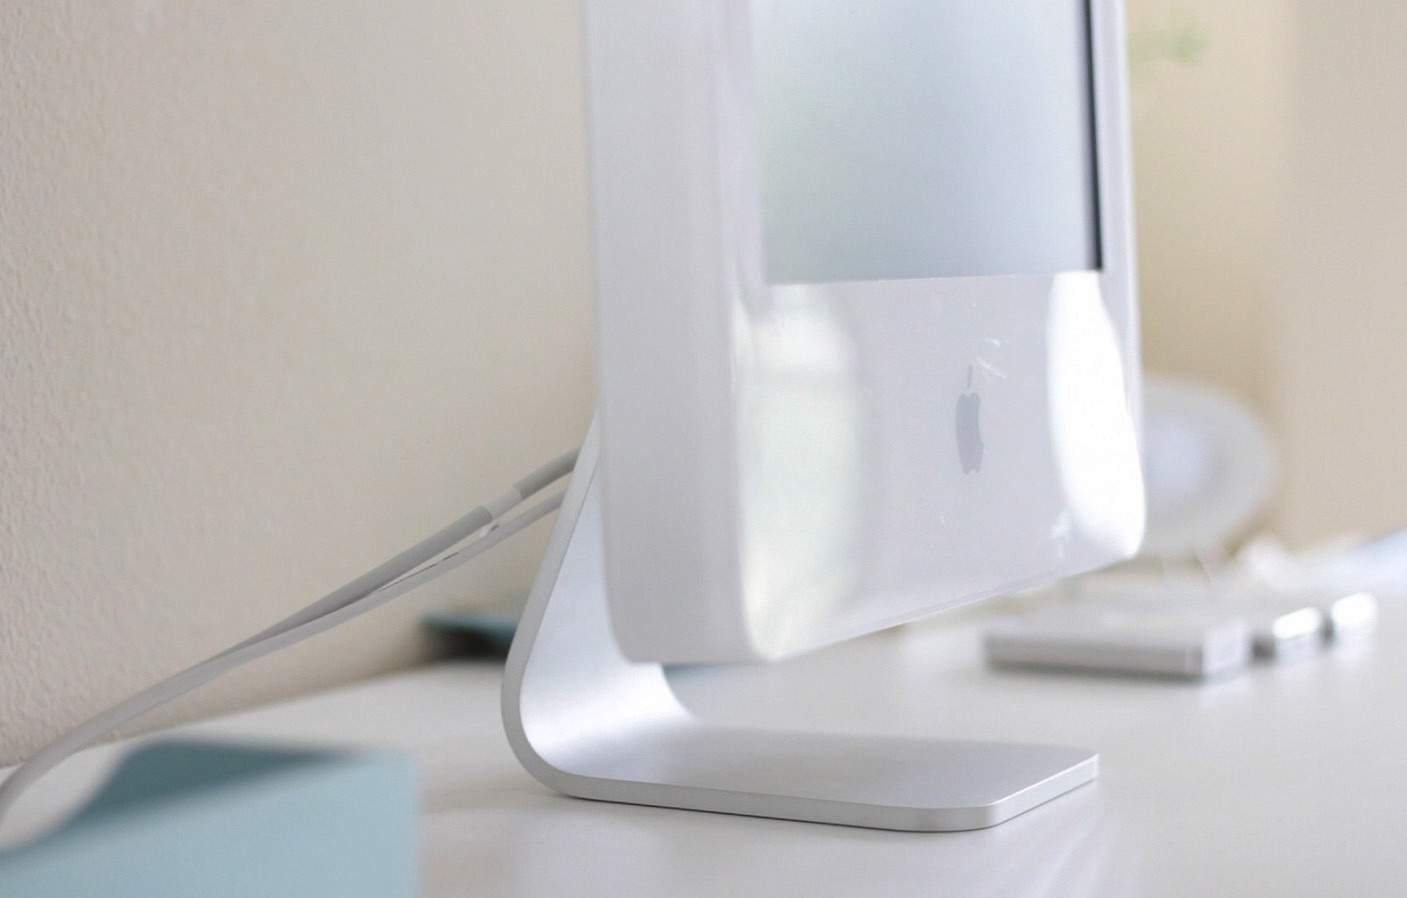 The iMac G5 looked like the world's biggest iPod.